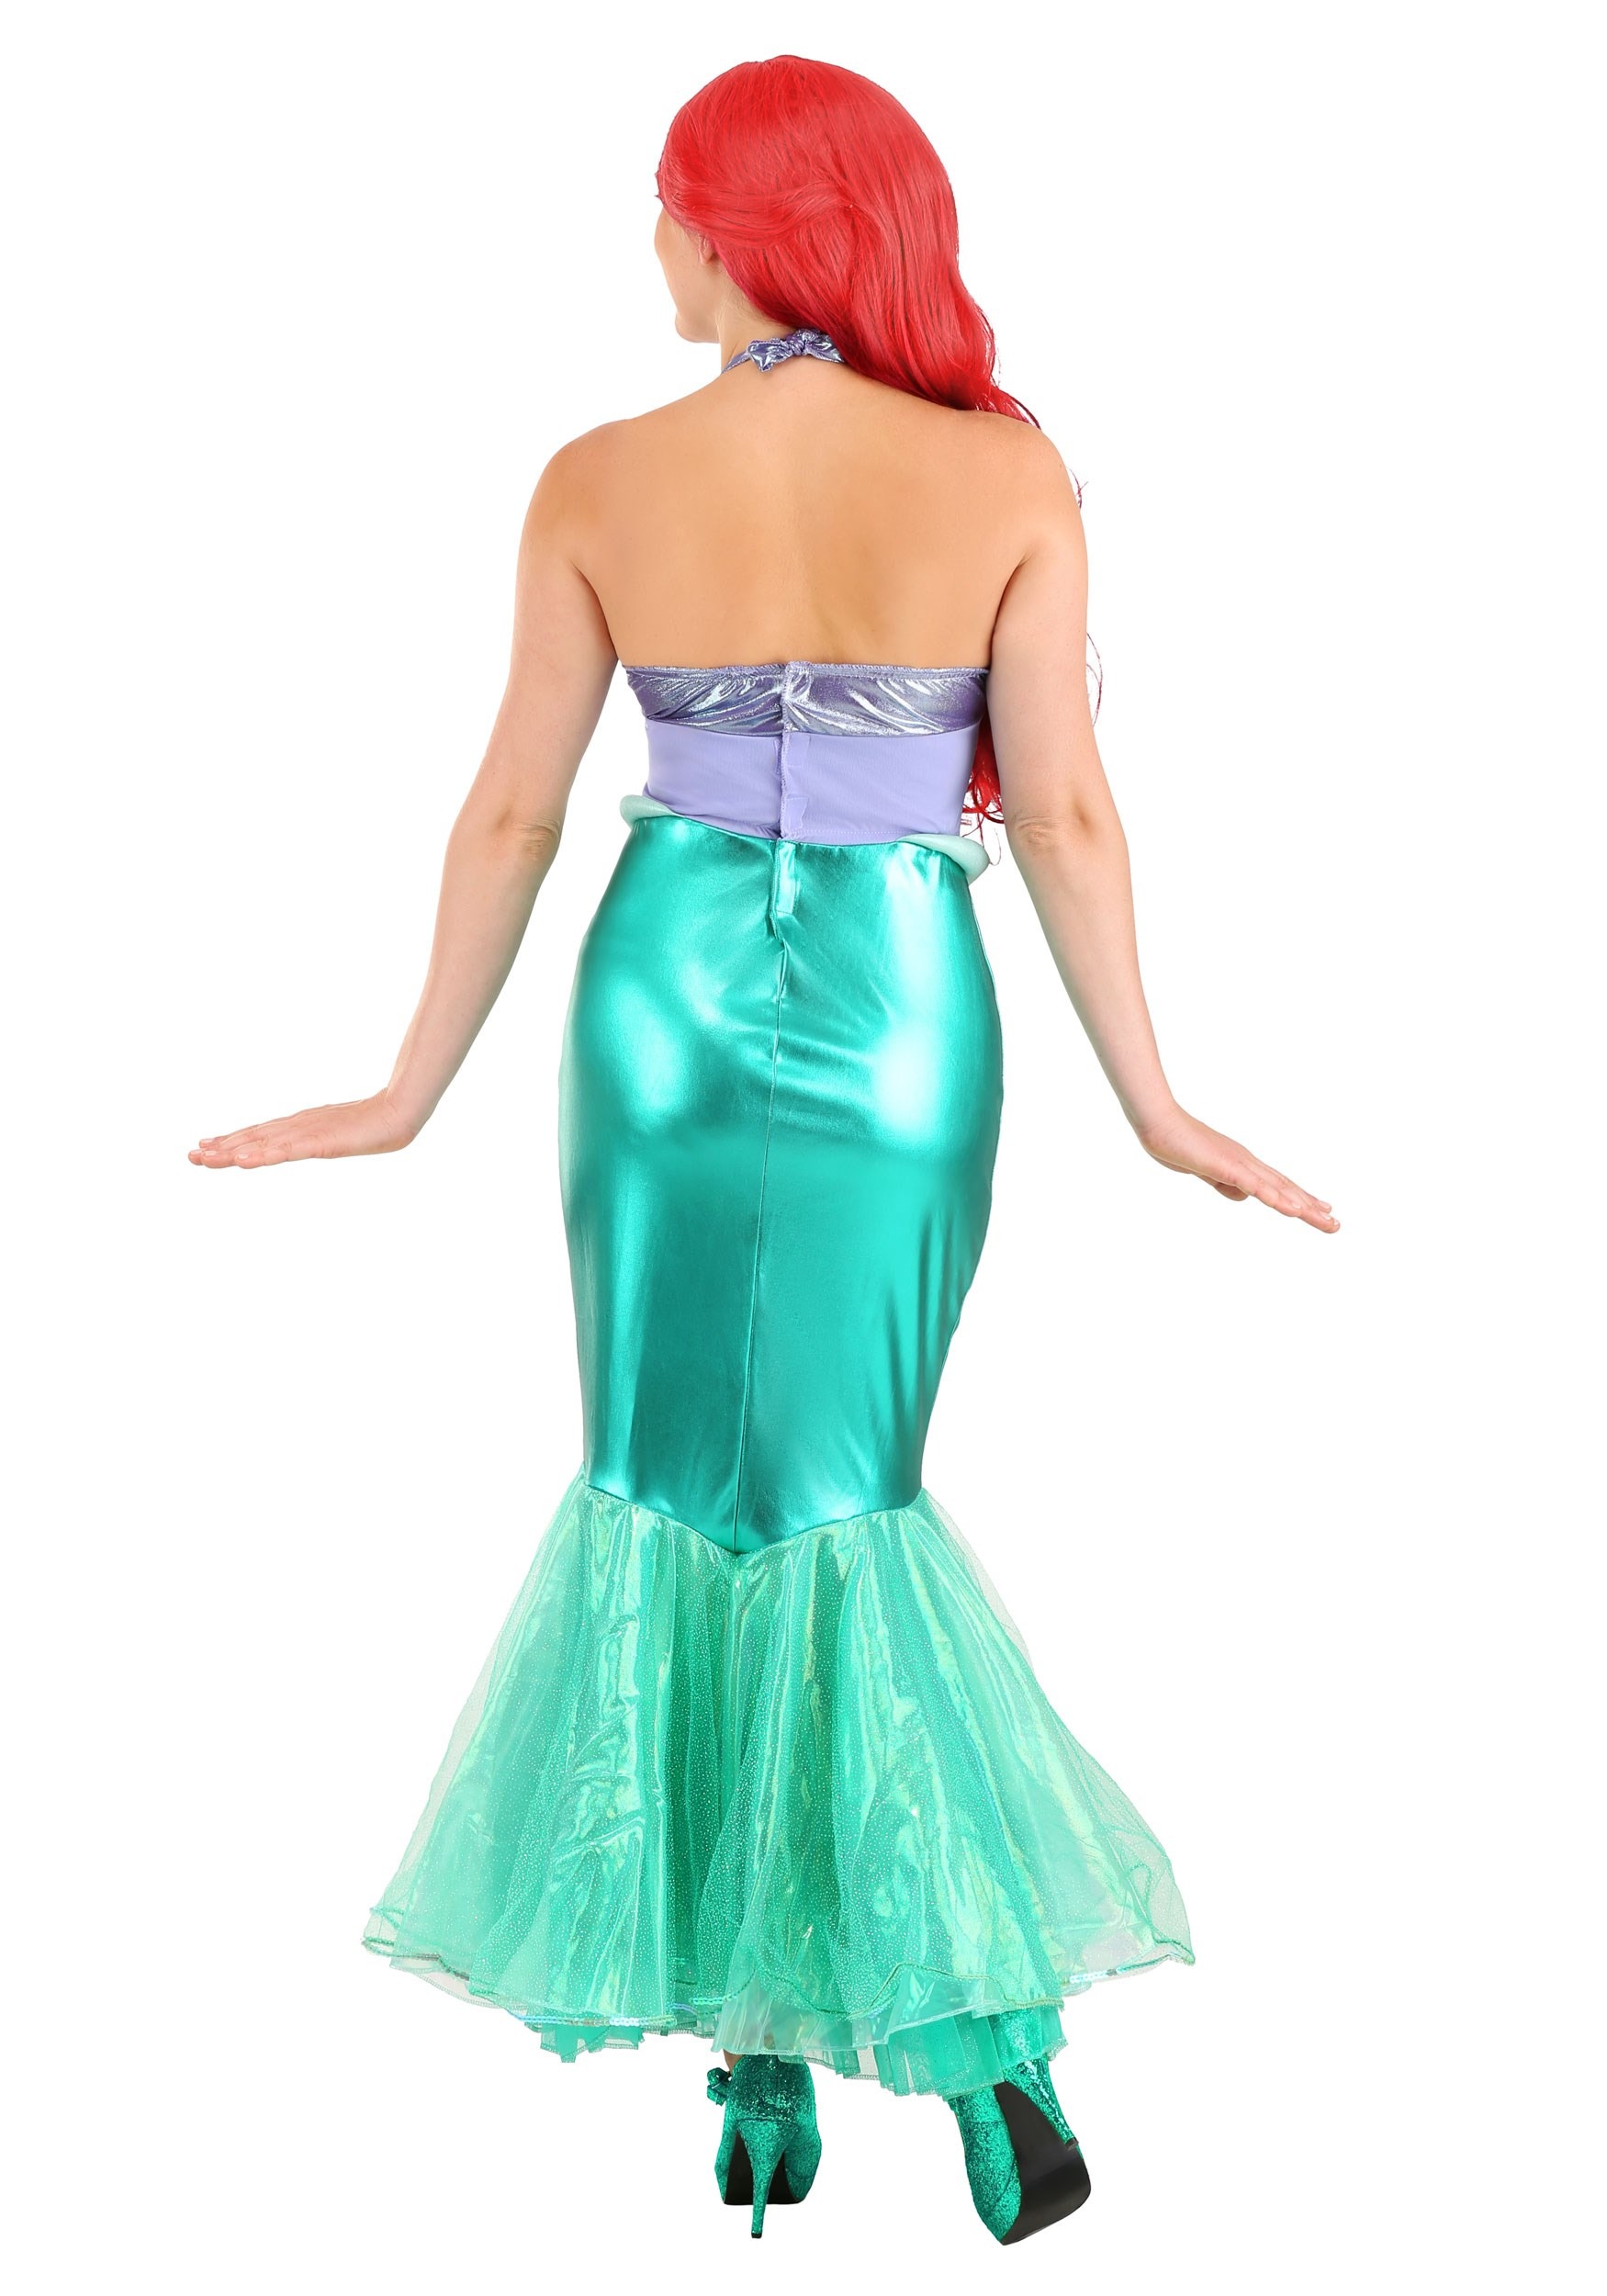 Details about  / Red The Little Mermaid Ariel Mermaid Princess Ariel Dress cosplay costume